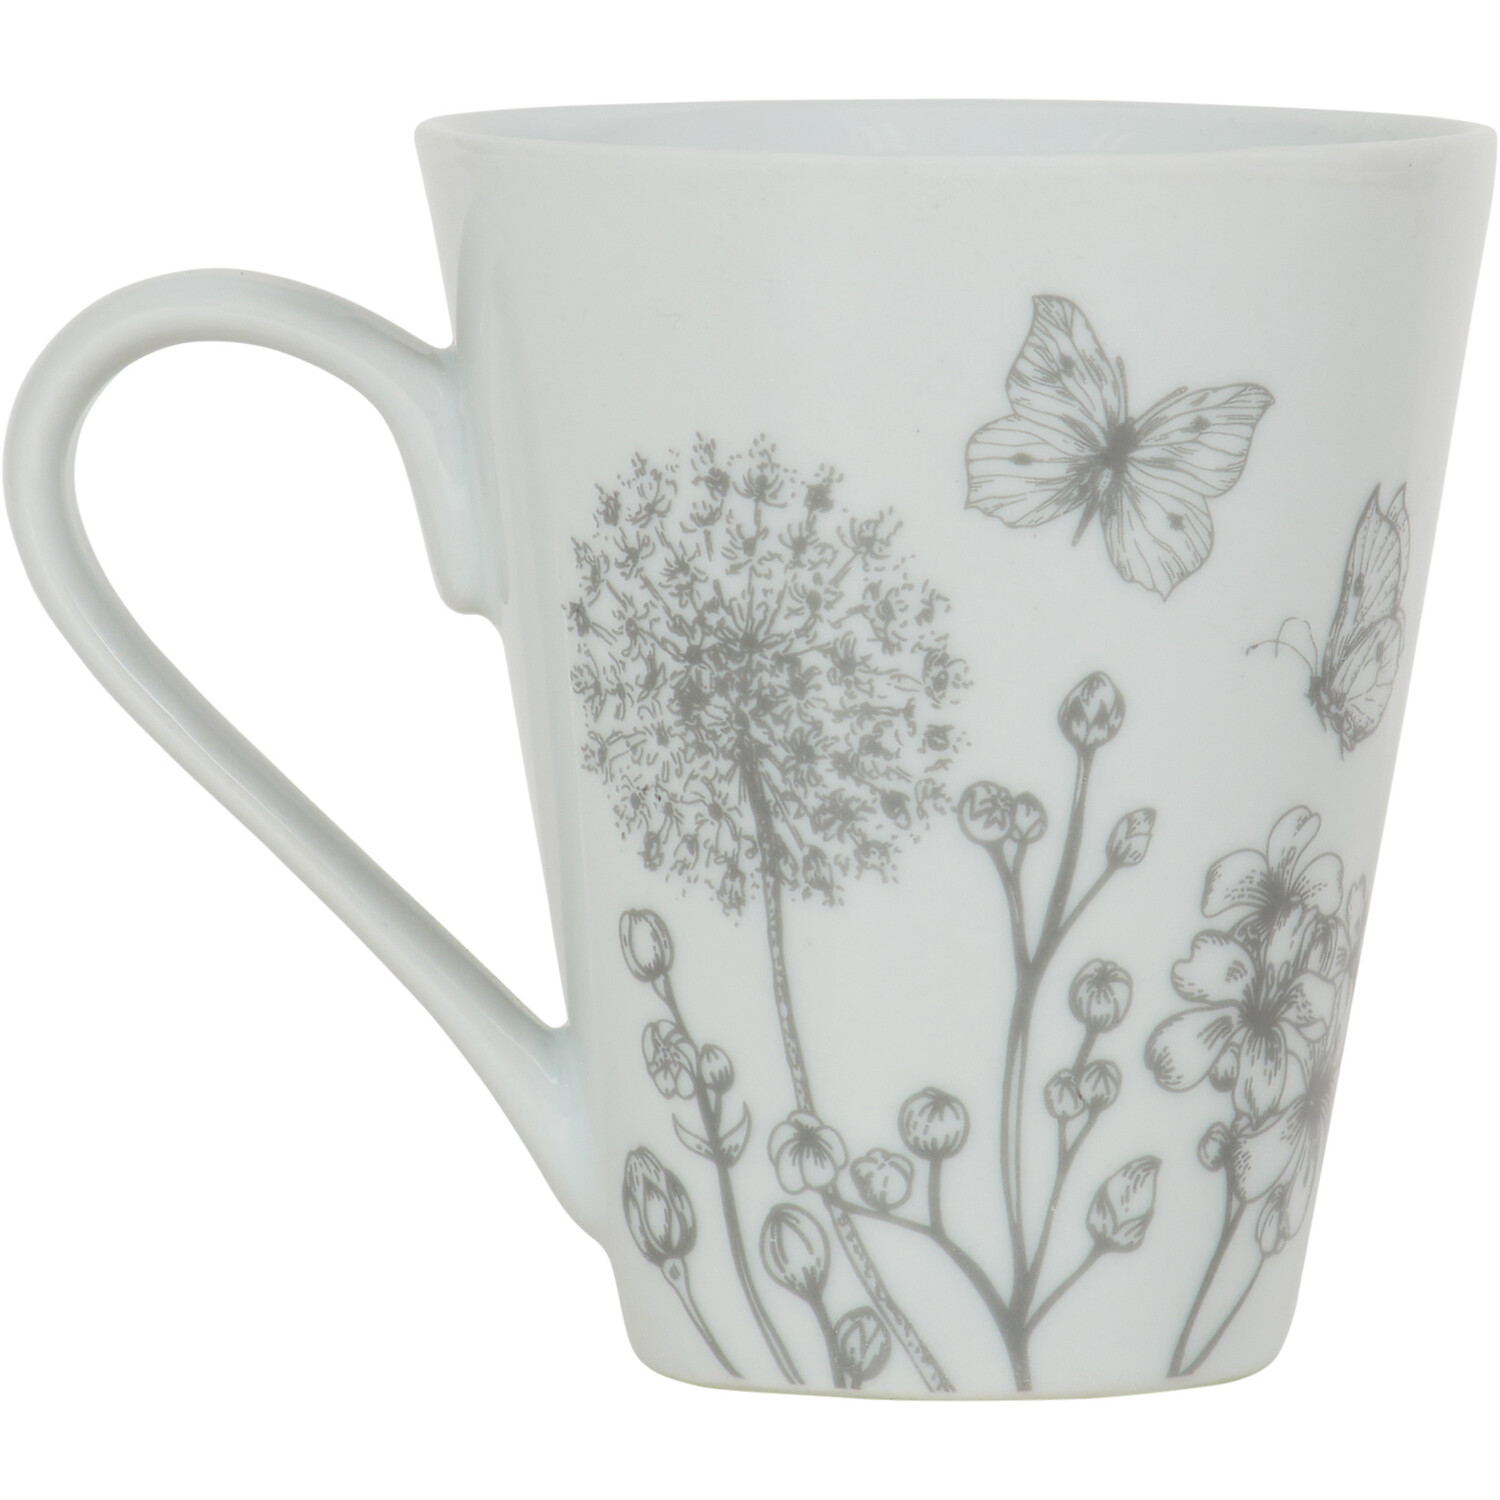 Pack of 4 Butterflies Mugs - White Image 2